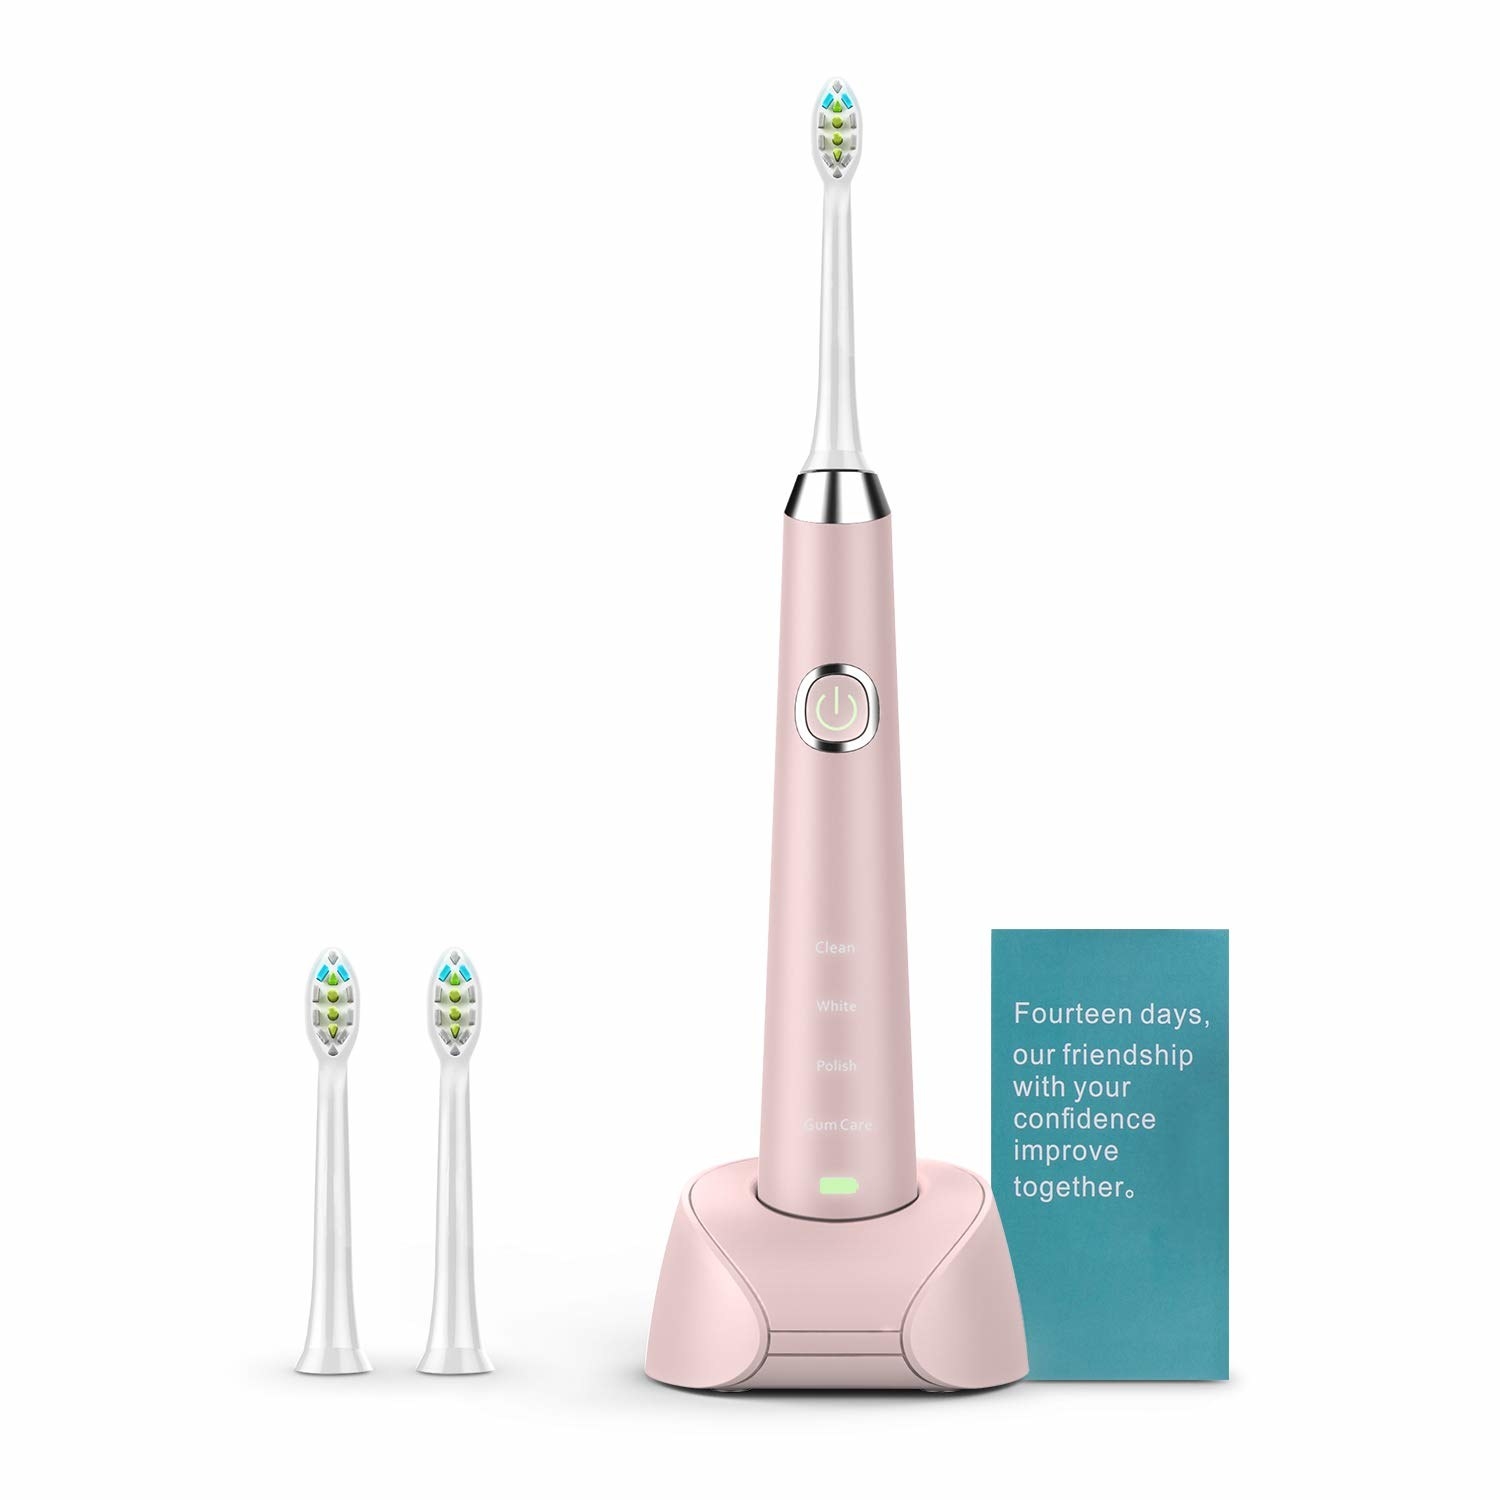 the pink metallic toothbrush with extra brush heads